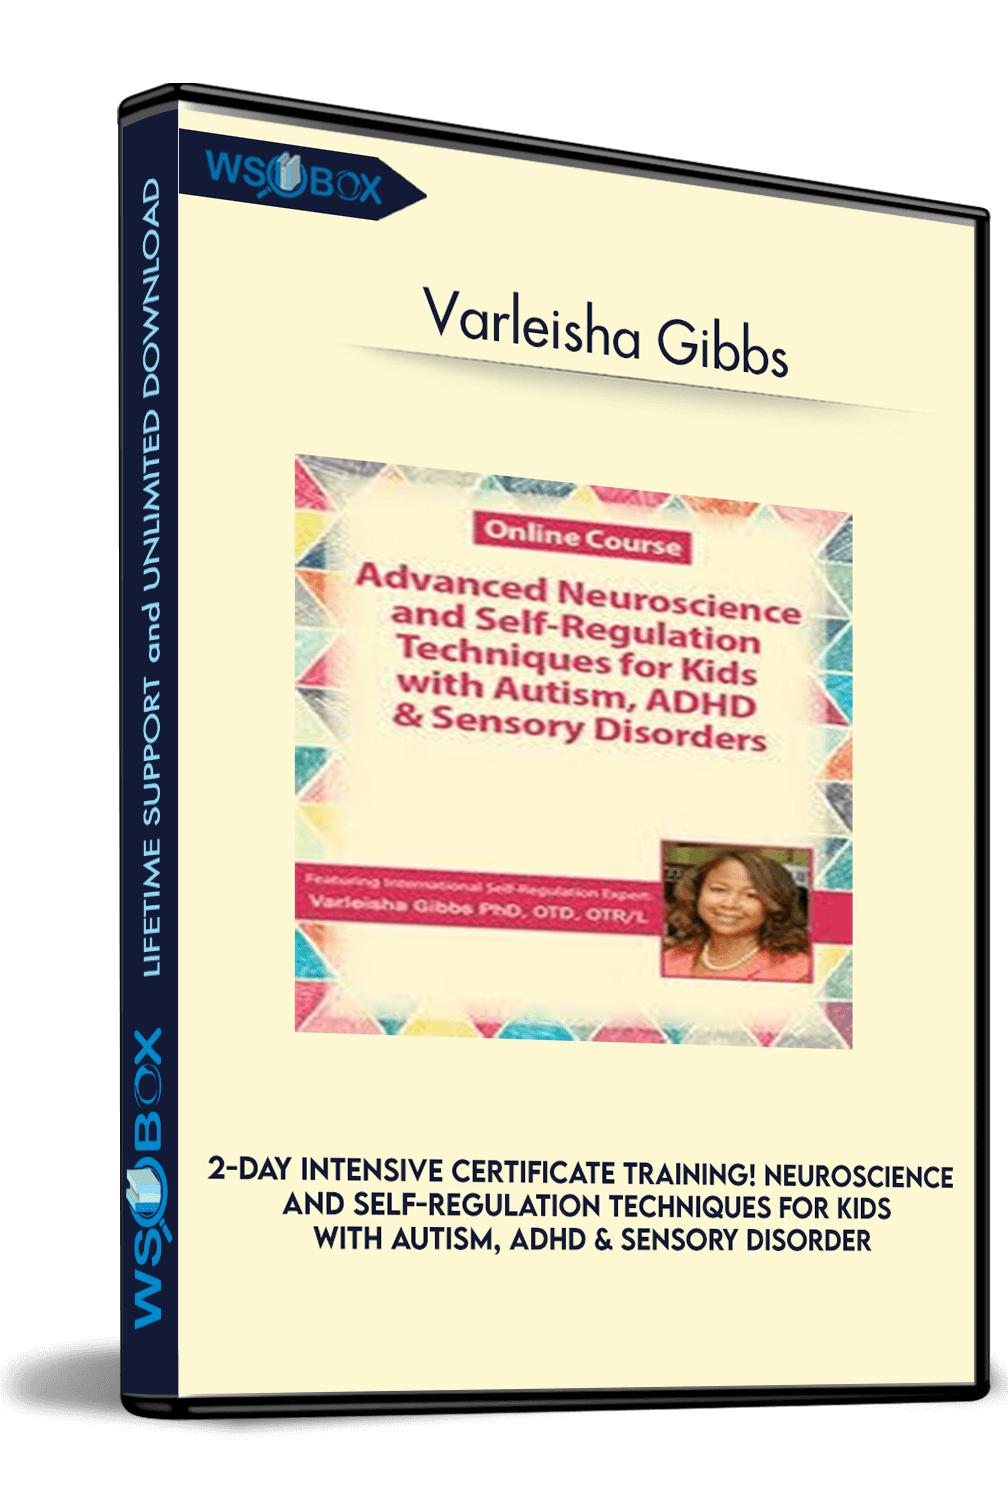 2-day-intensive-certificate-training-neuroscience-and-self-regulation-techniques-for-kids-with-autism-adhd-sensory-disorders-varleisha-gibbs